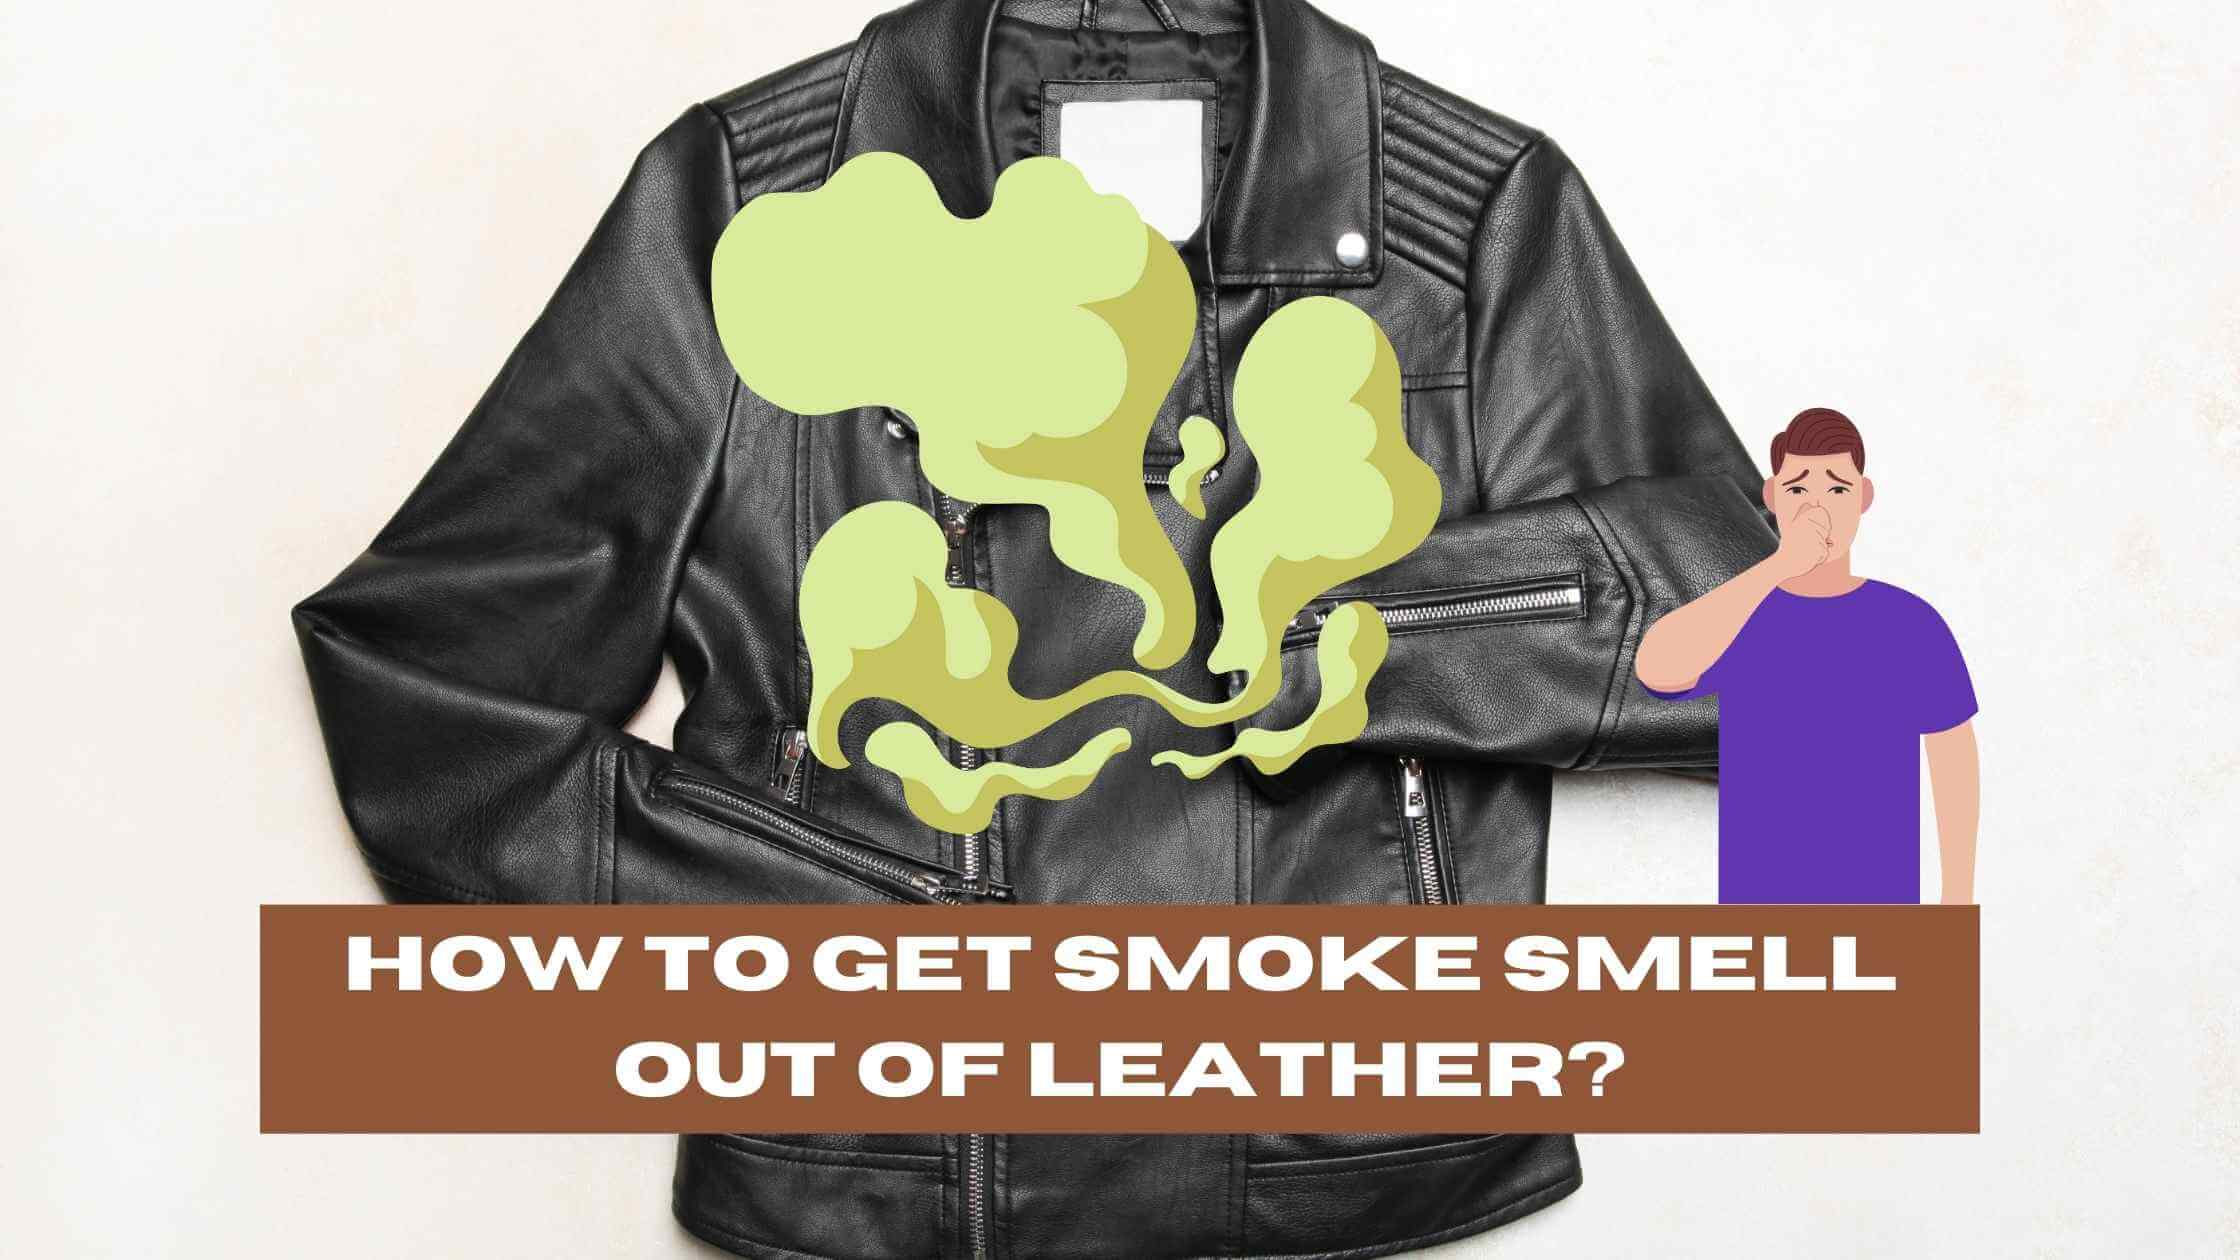 How to Get Smoke Smell Out of Leather